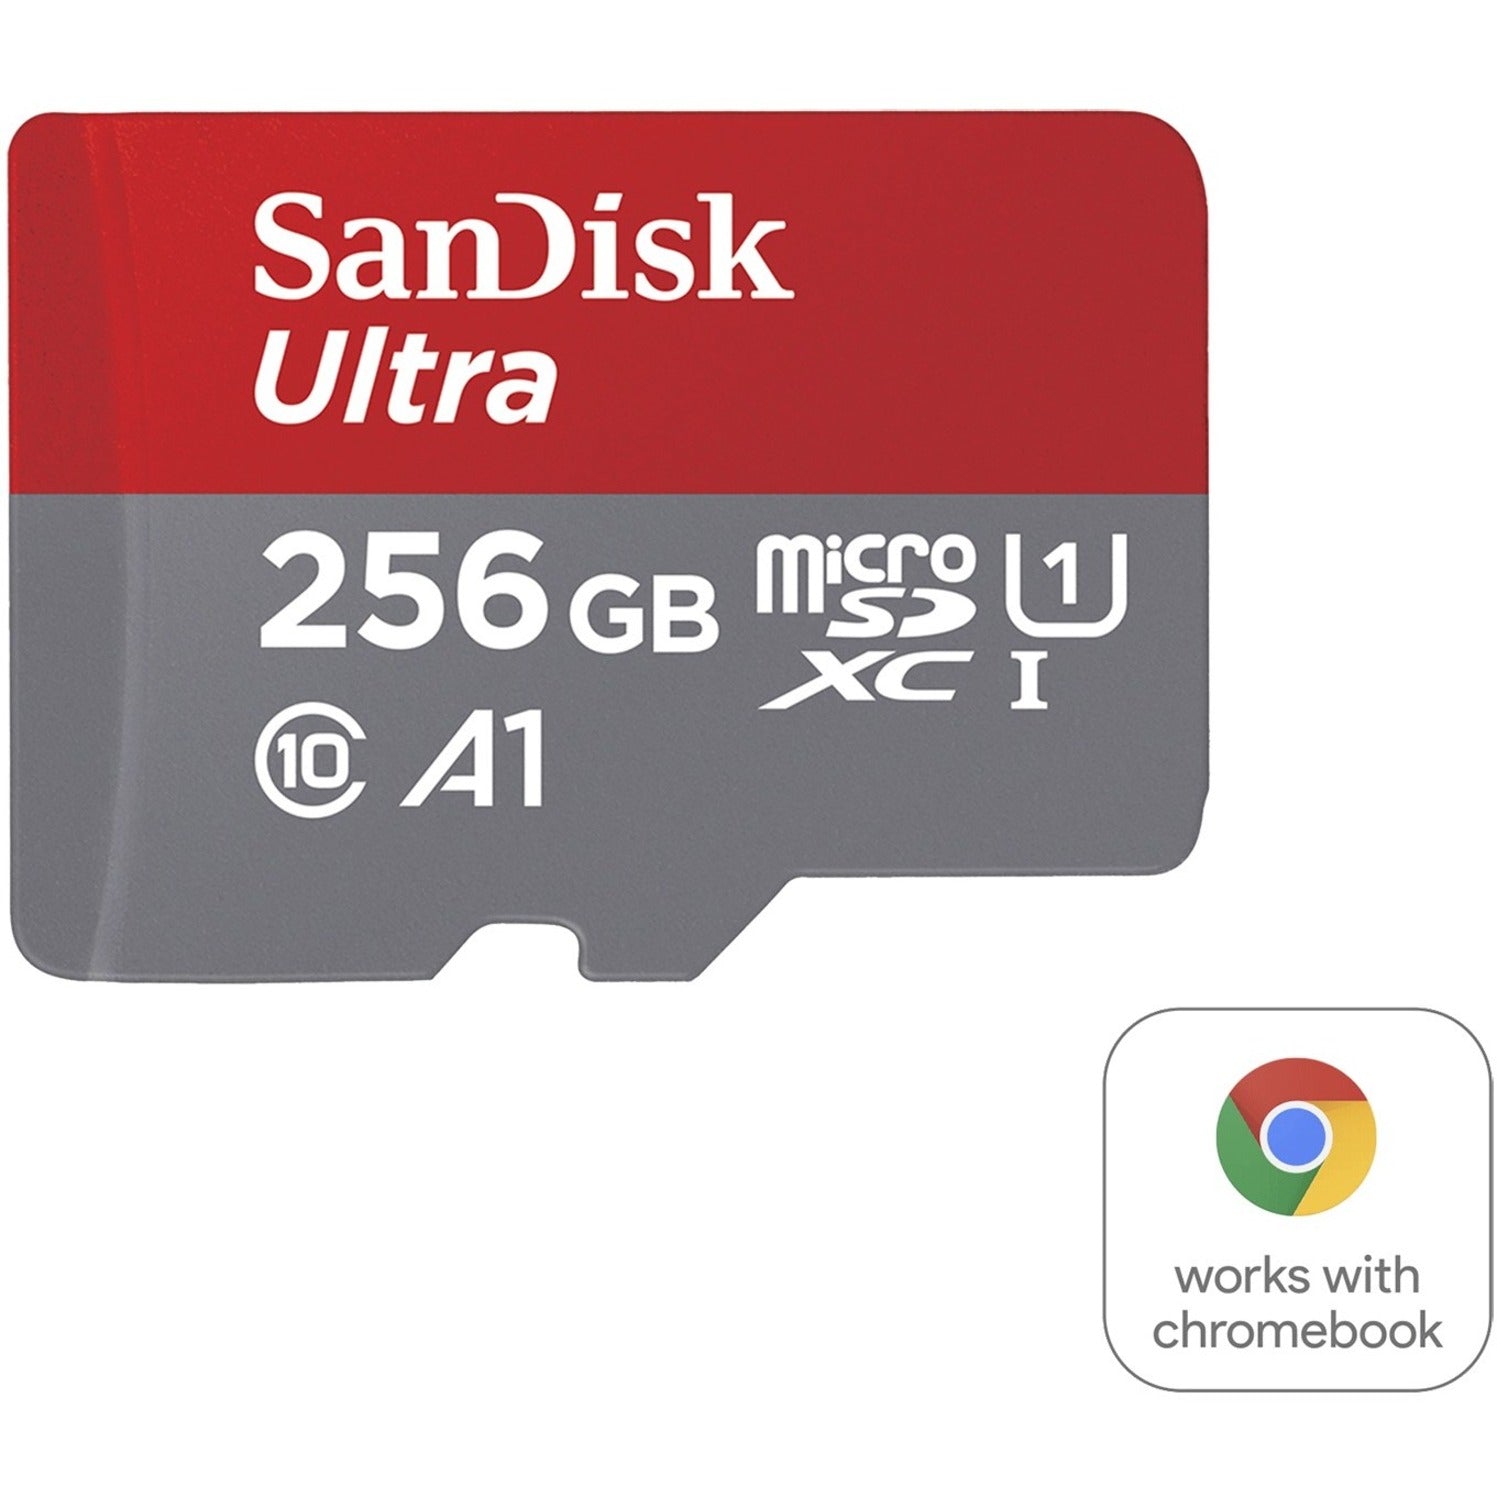 SanDisk SDSQUA4-256G-GN6FA Ultra microSDXC UHS-I Card with Adapter - 256GB, 10 Year Limited Warranty